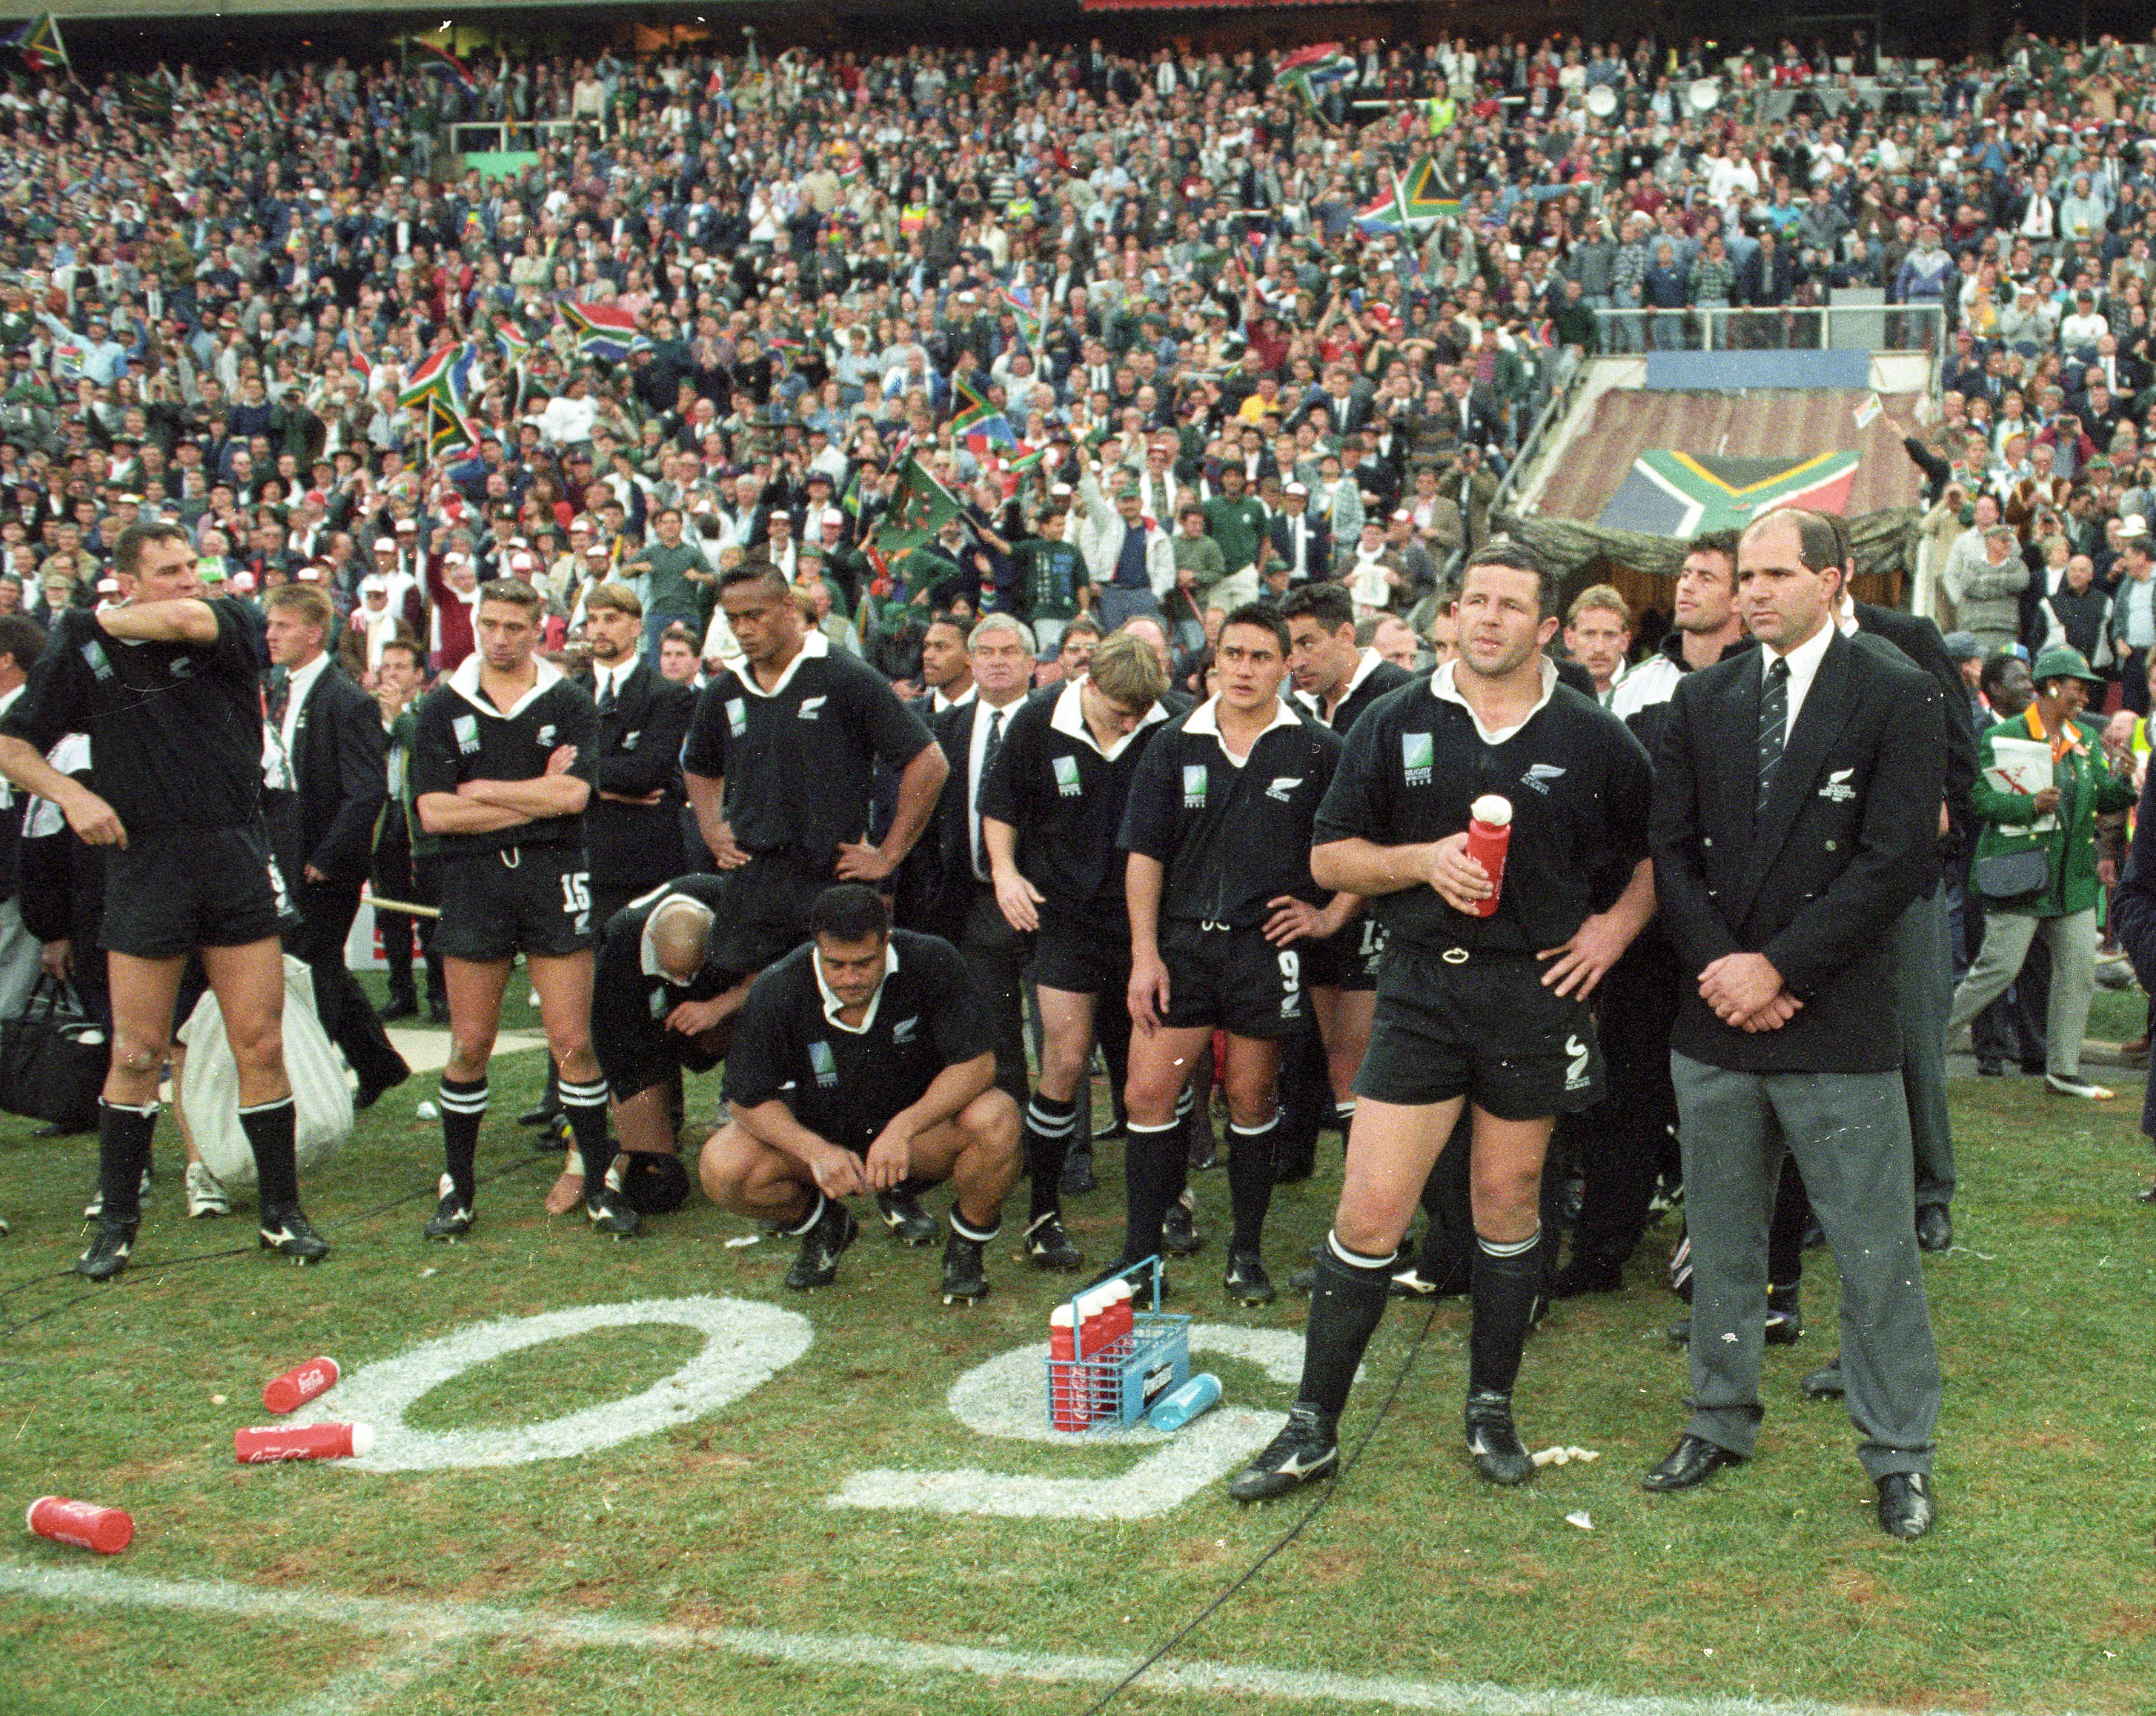 The Top 5 Rugby World Cup Quarterfinal Matches Of All-Time Ranked - FloRugby